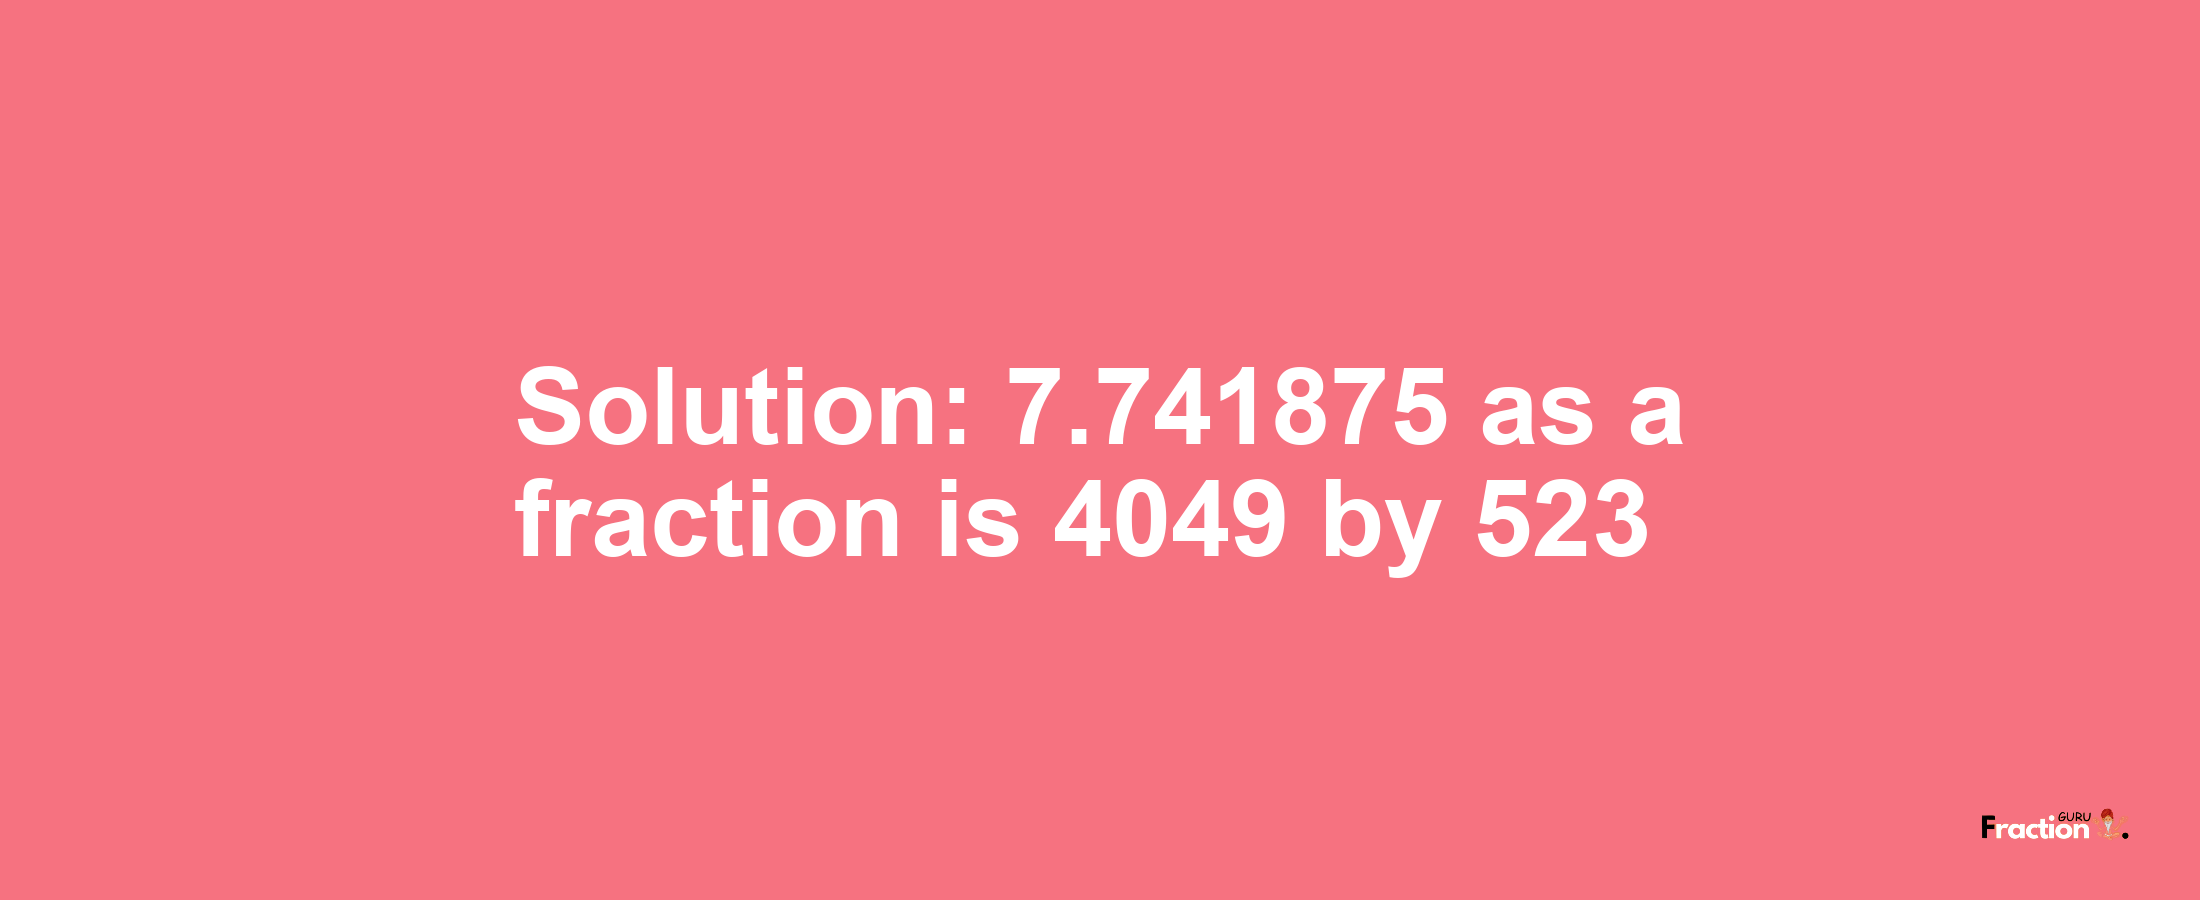 Solution:7.741875 as a fraction is 4049/523